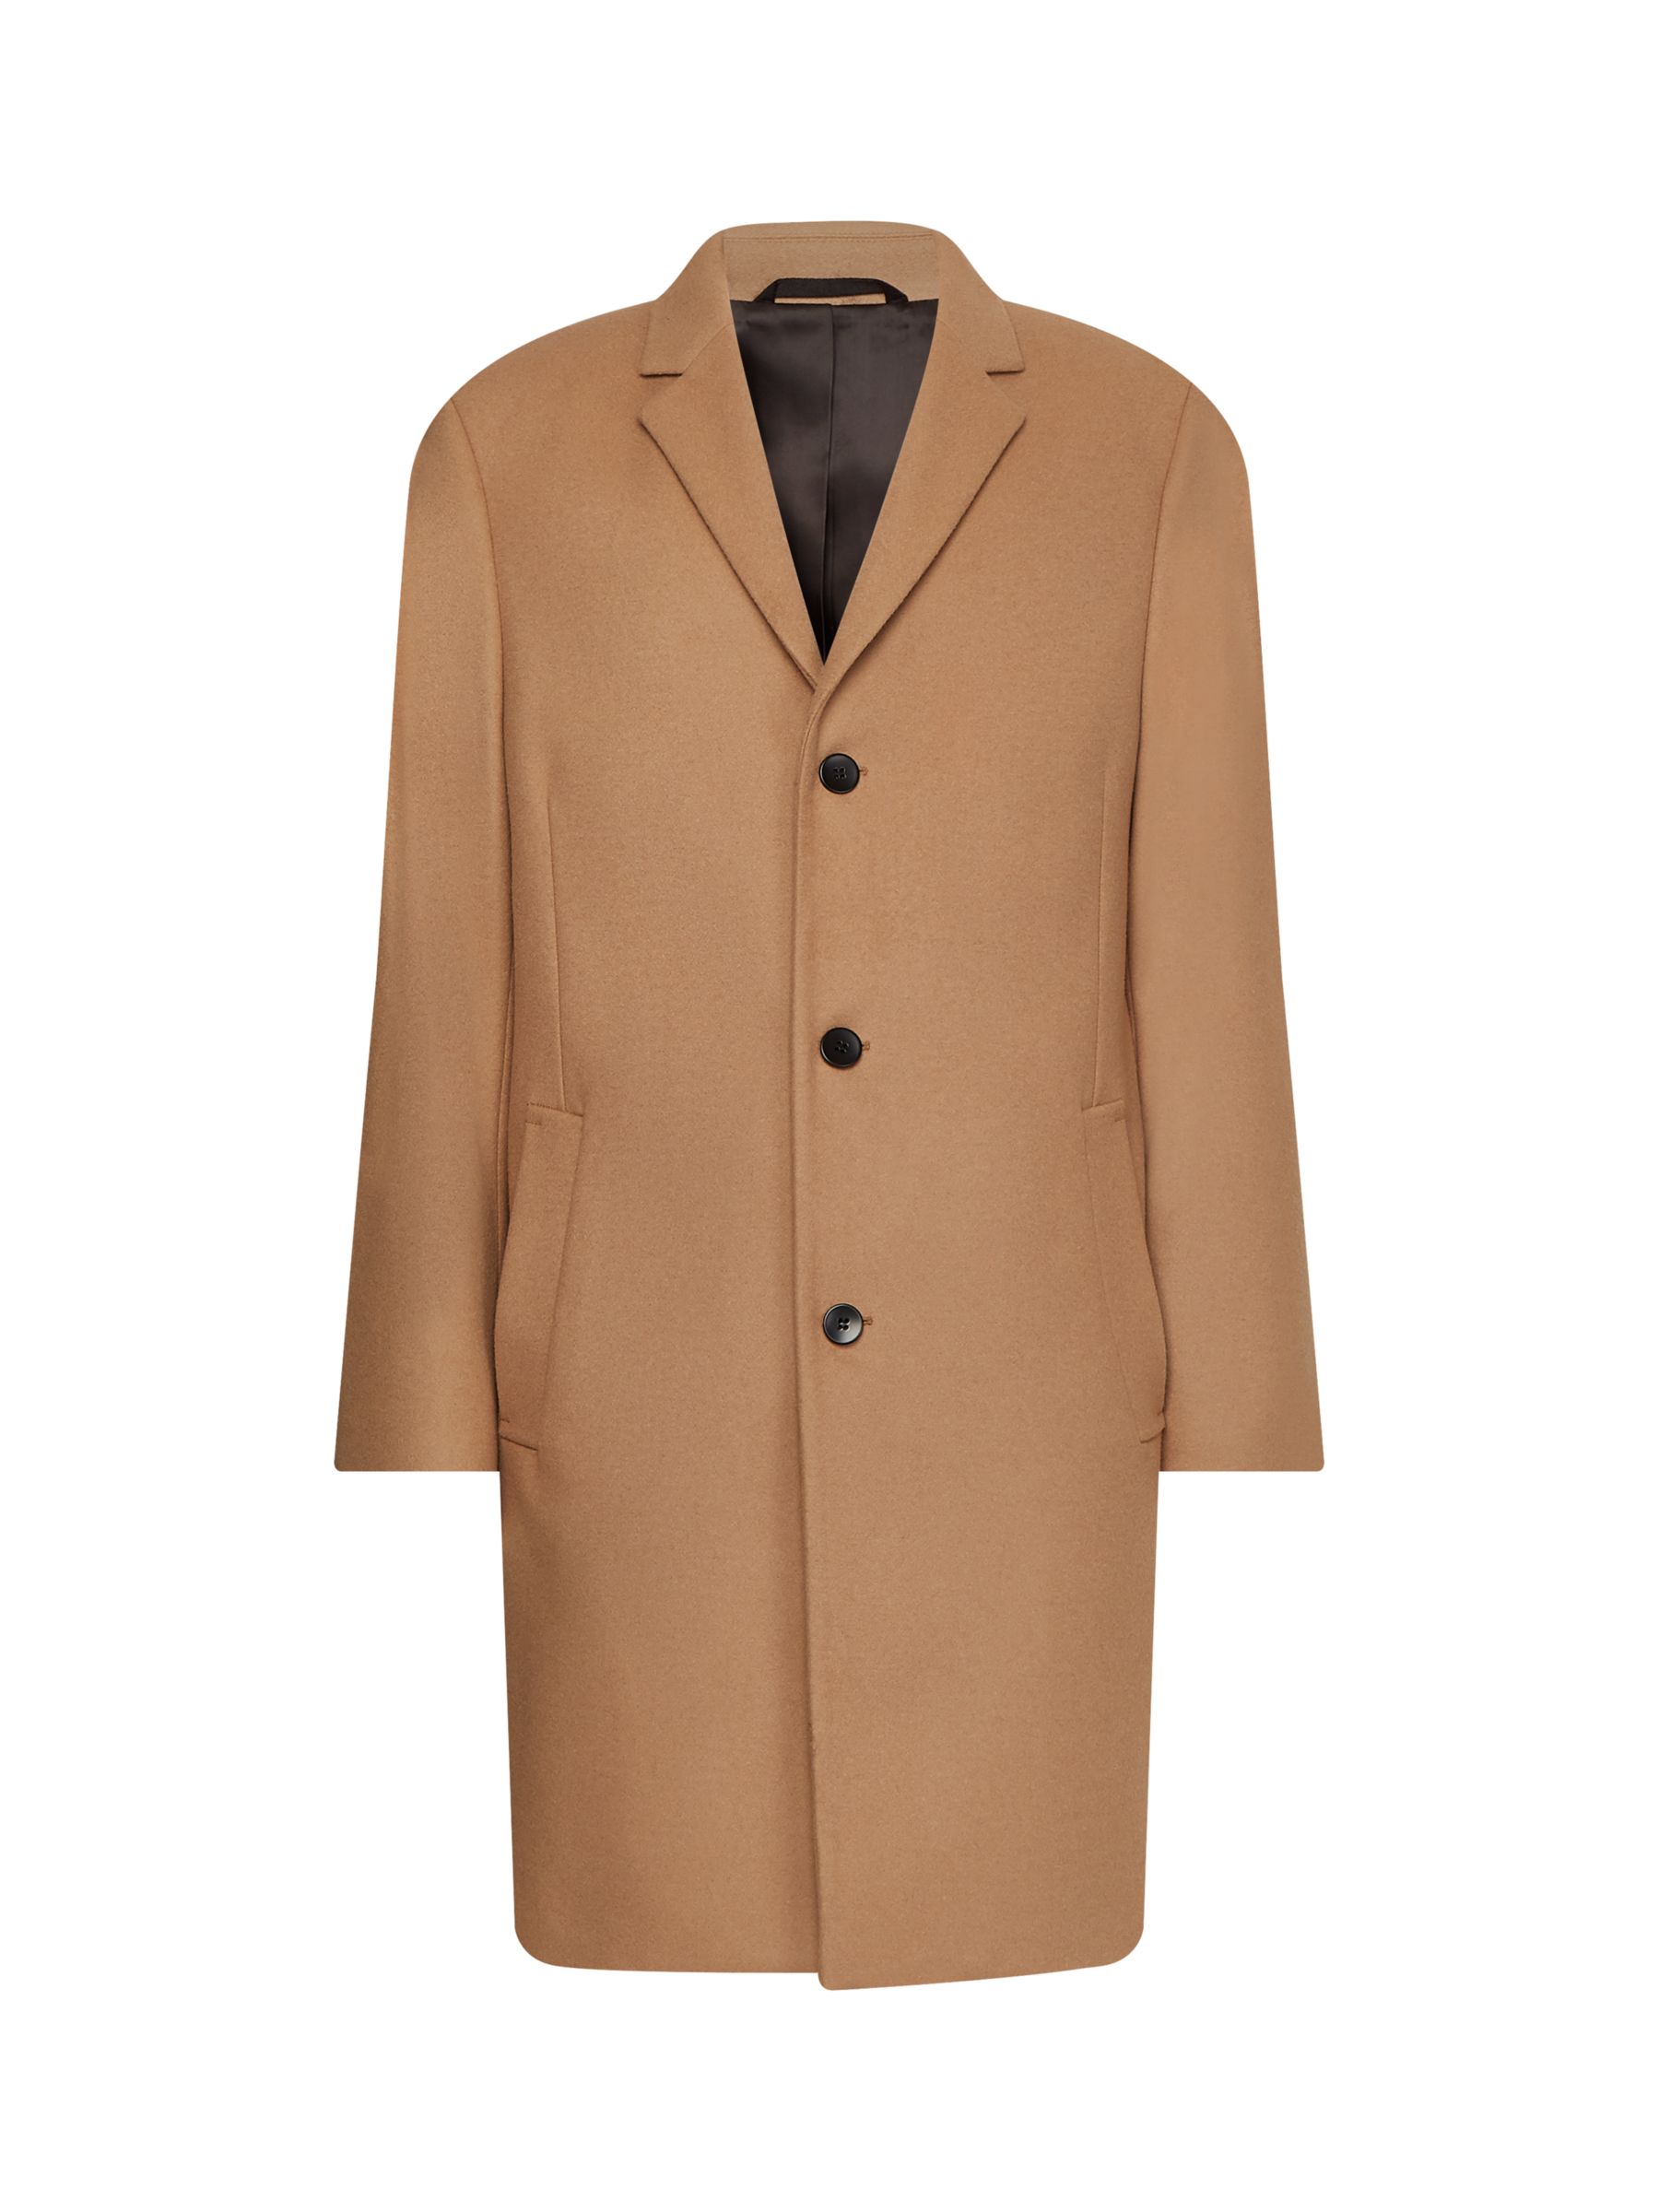 Beginner Attent Spreek uit Calvin Klein Wool and Cashmere Tailored Coat, Camel at John Lewis & Partners